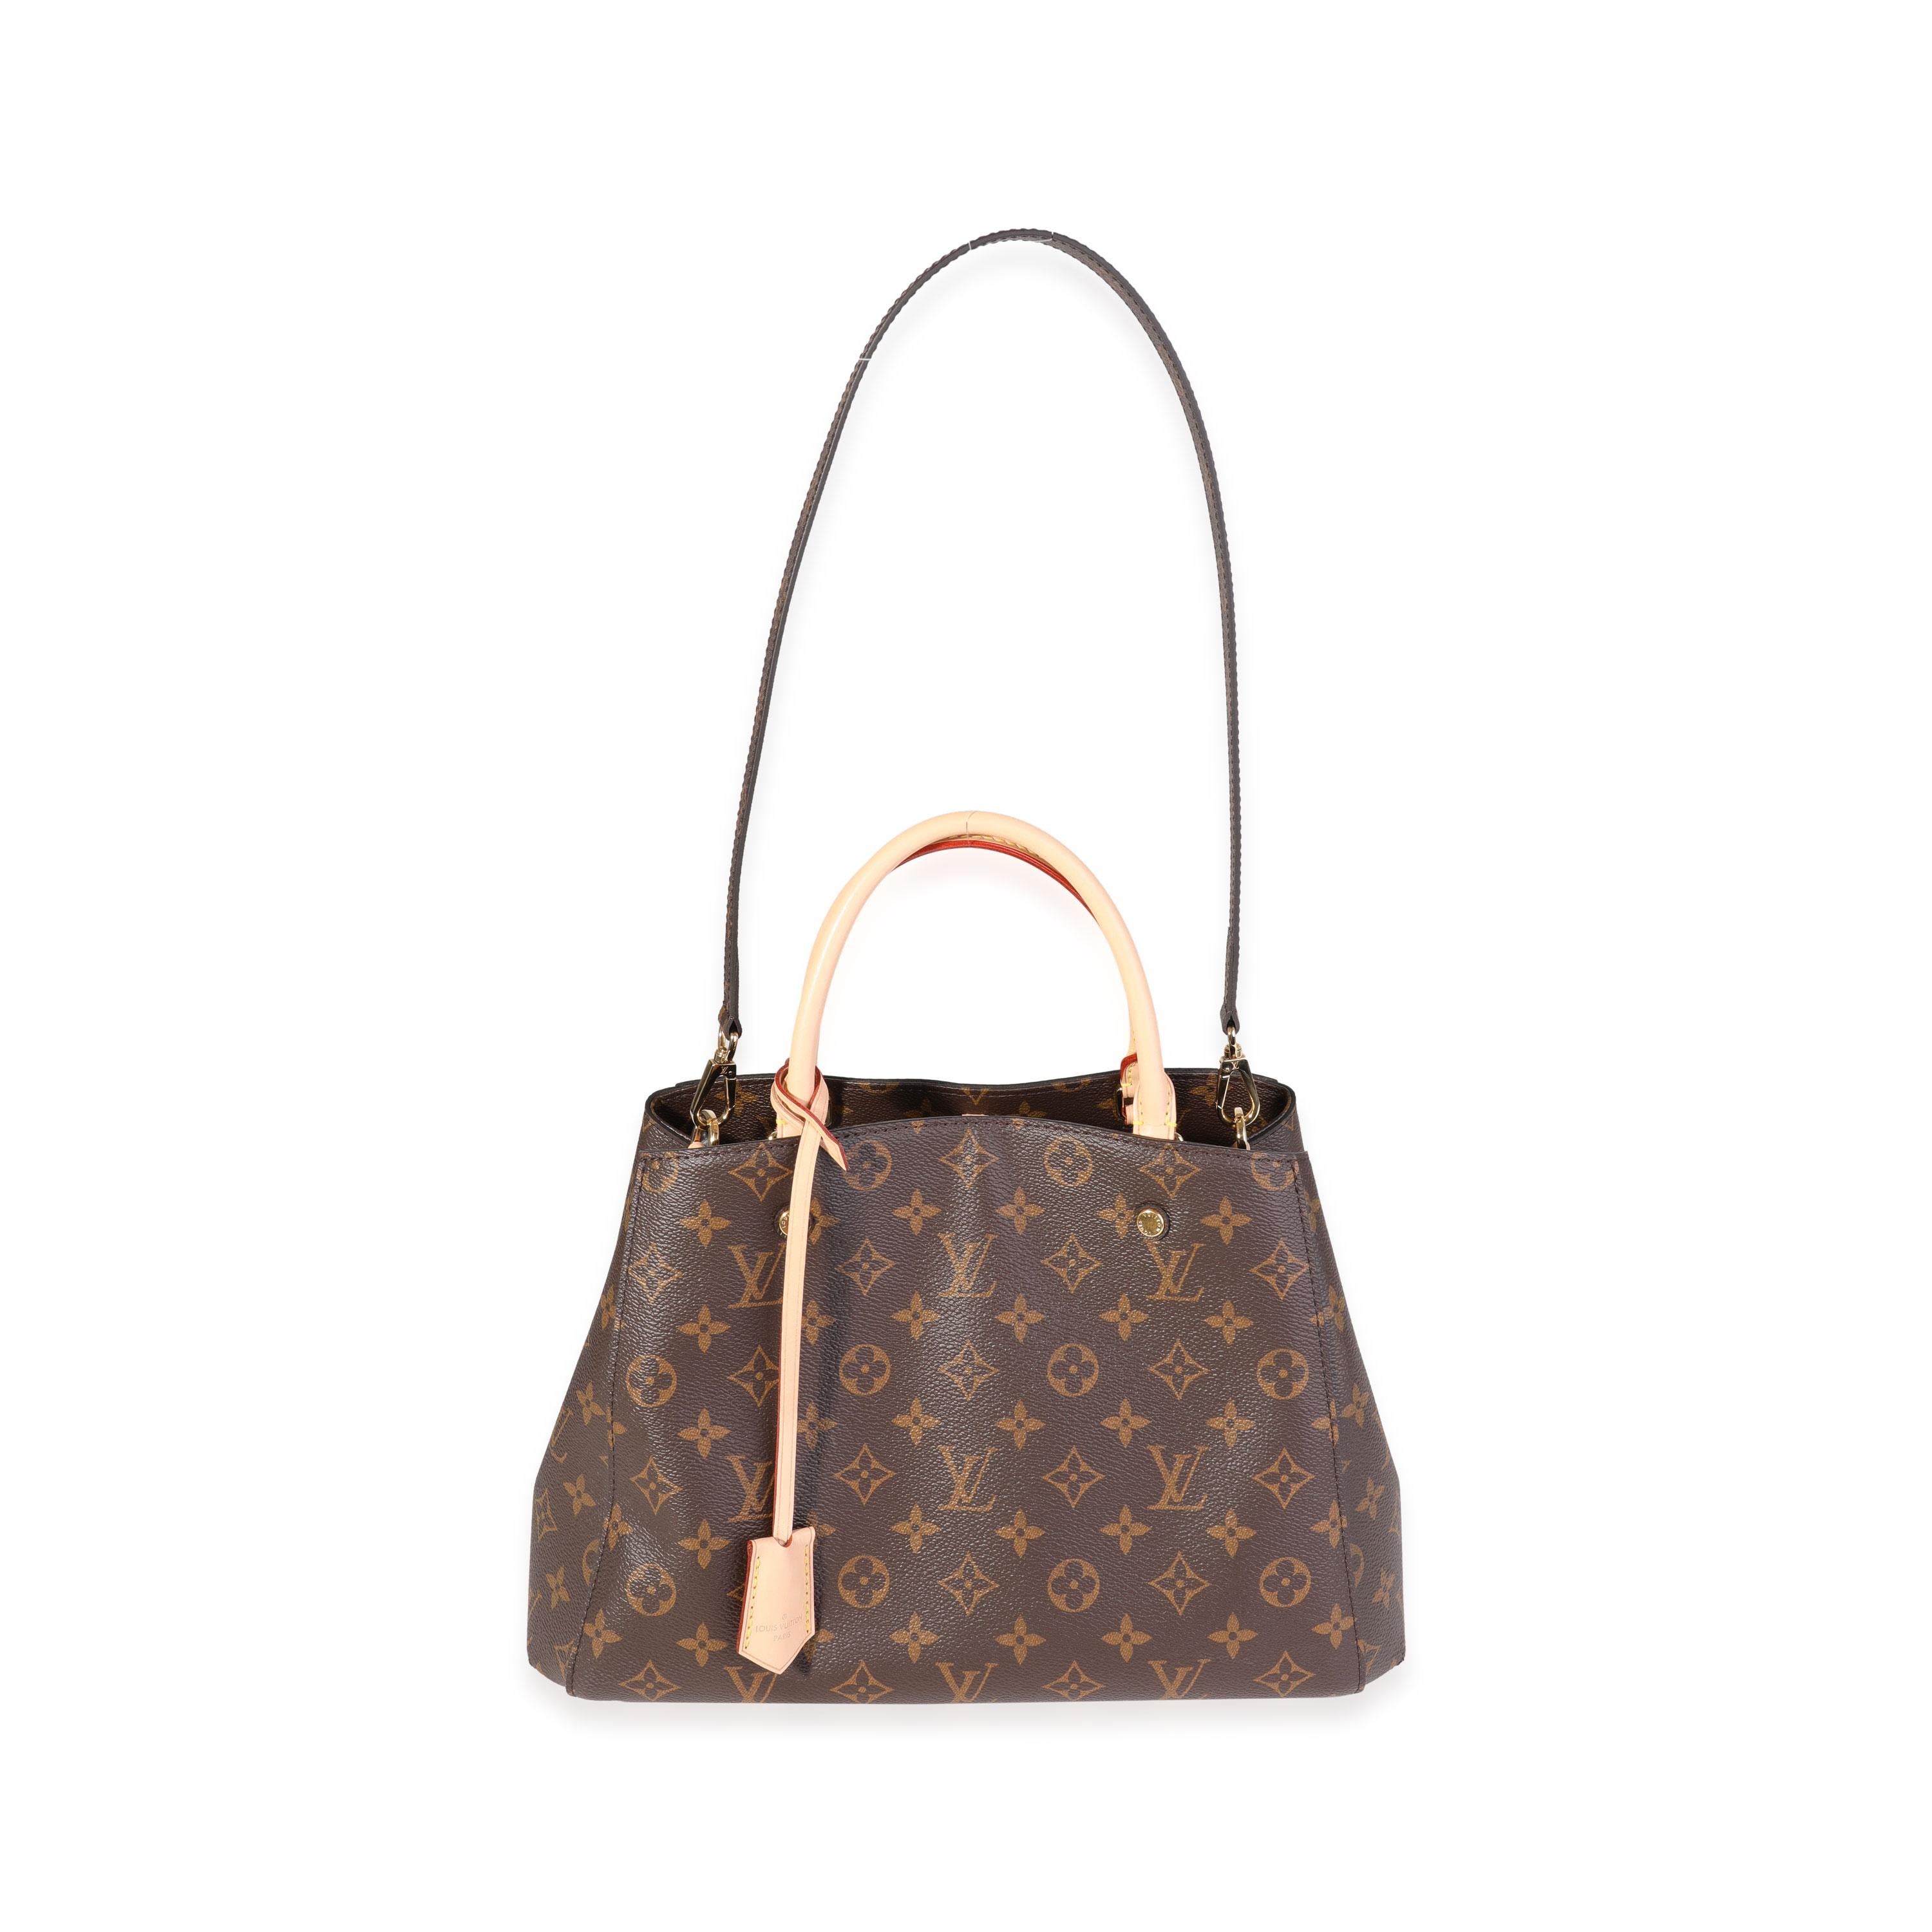 Listing Title: Louis Vuitton Monogram Canvas Montaigne MM
SKU: 120684
MSRP: 2910.00
Condition: Pre-owned 
Handbag Condition: Very Good
Condition Comments: Very God Condition. Scratching to hardware. Light discoloration to interior lining.
Brand: